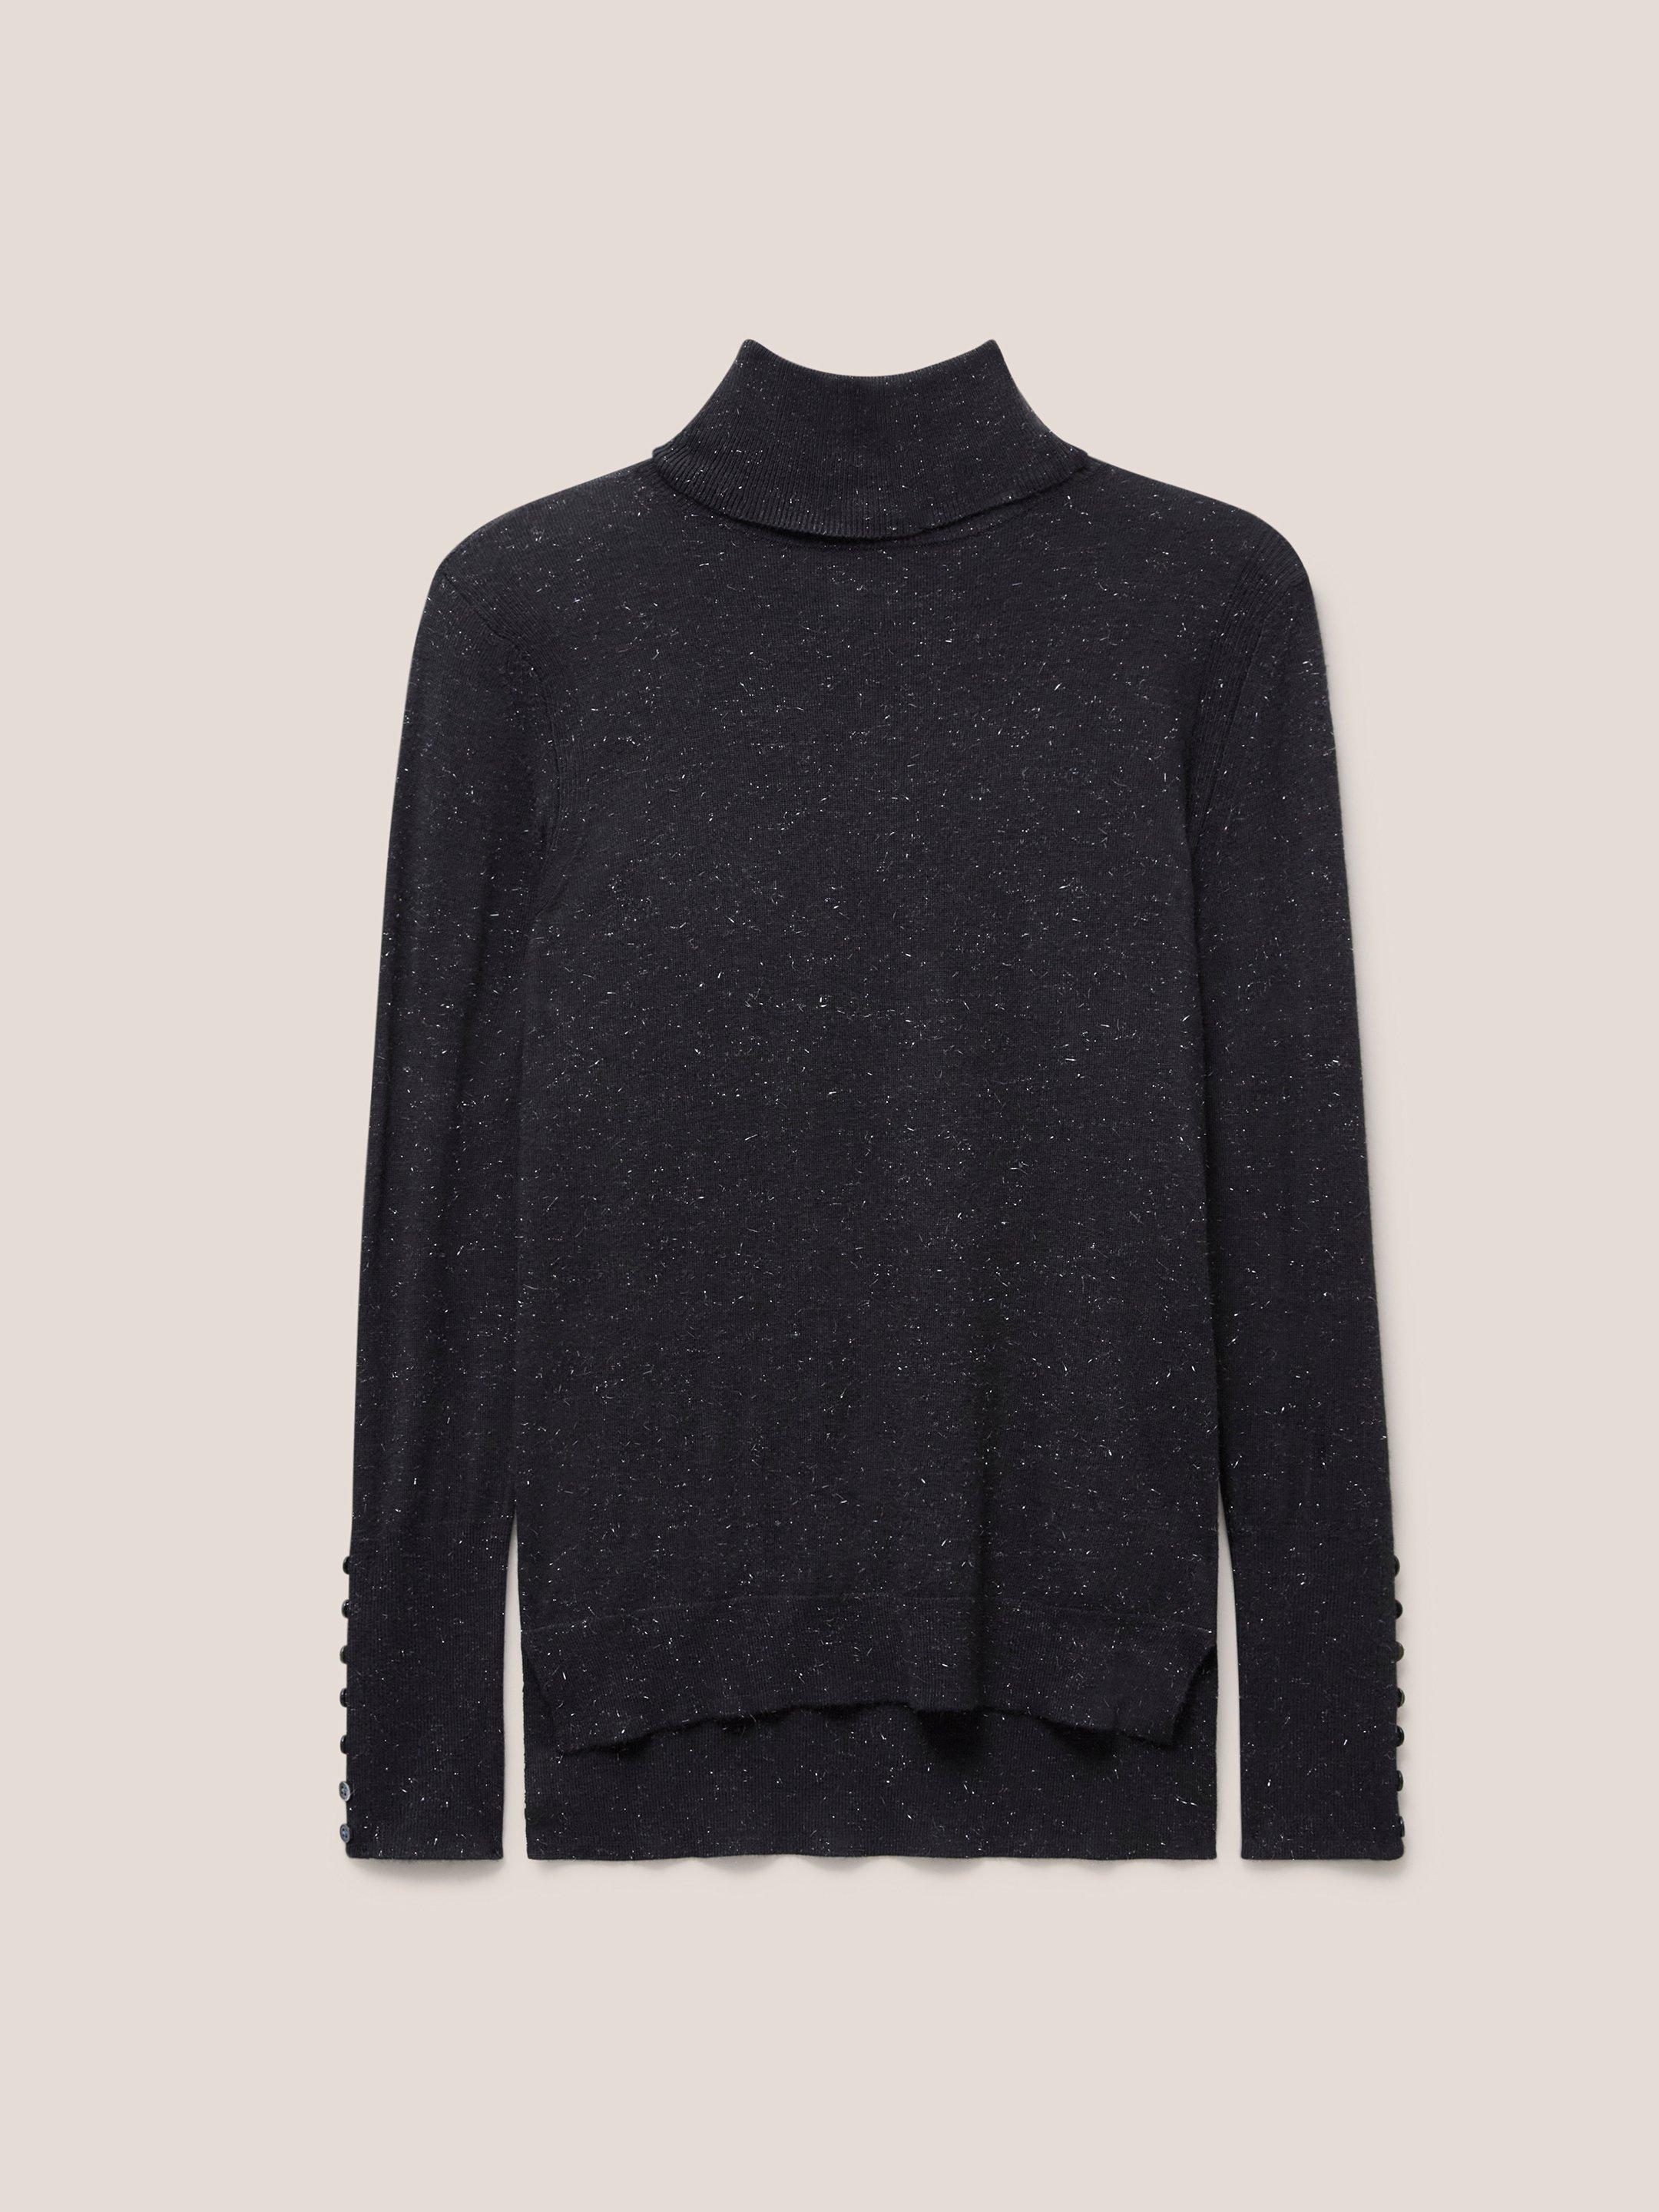 SPARKLE ROLL NECK JUMPER in CHARC GREY - FLAT FRONT